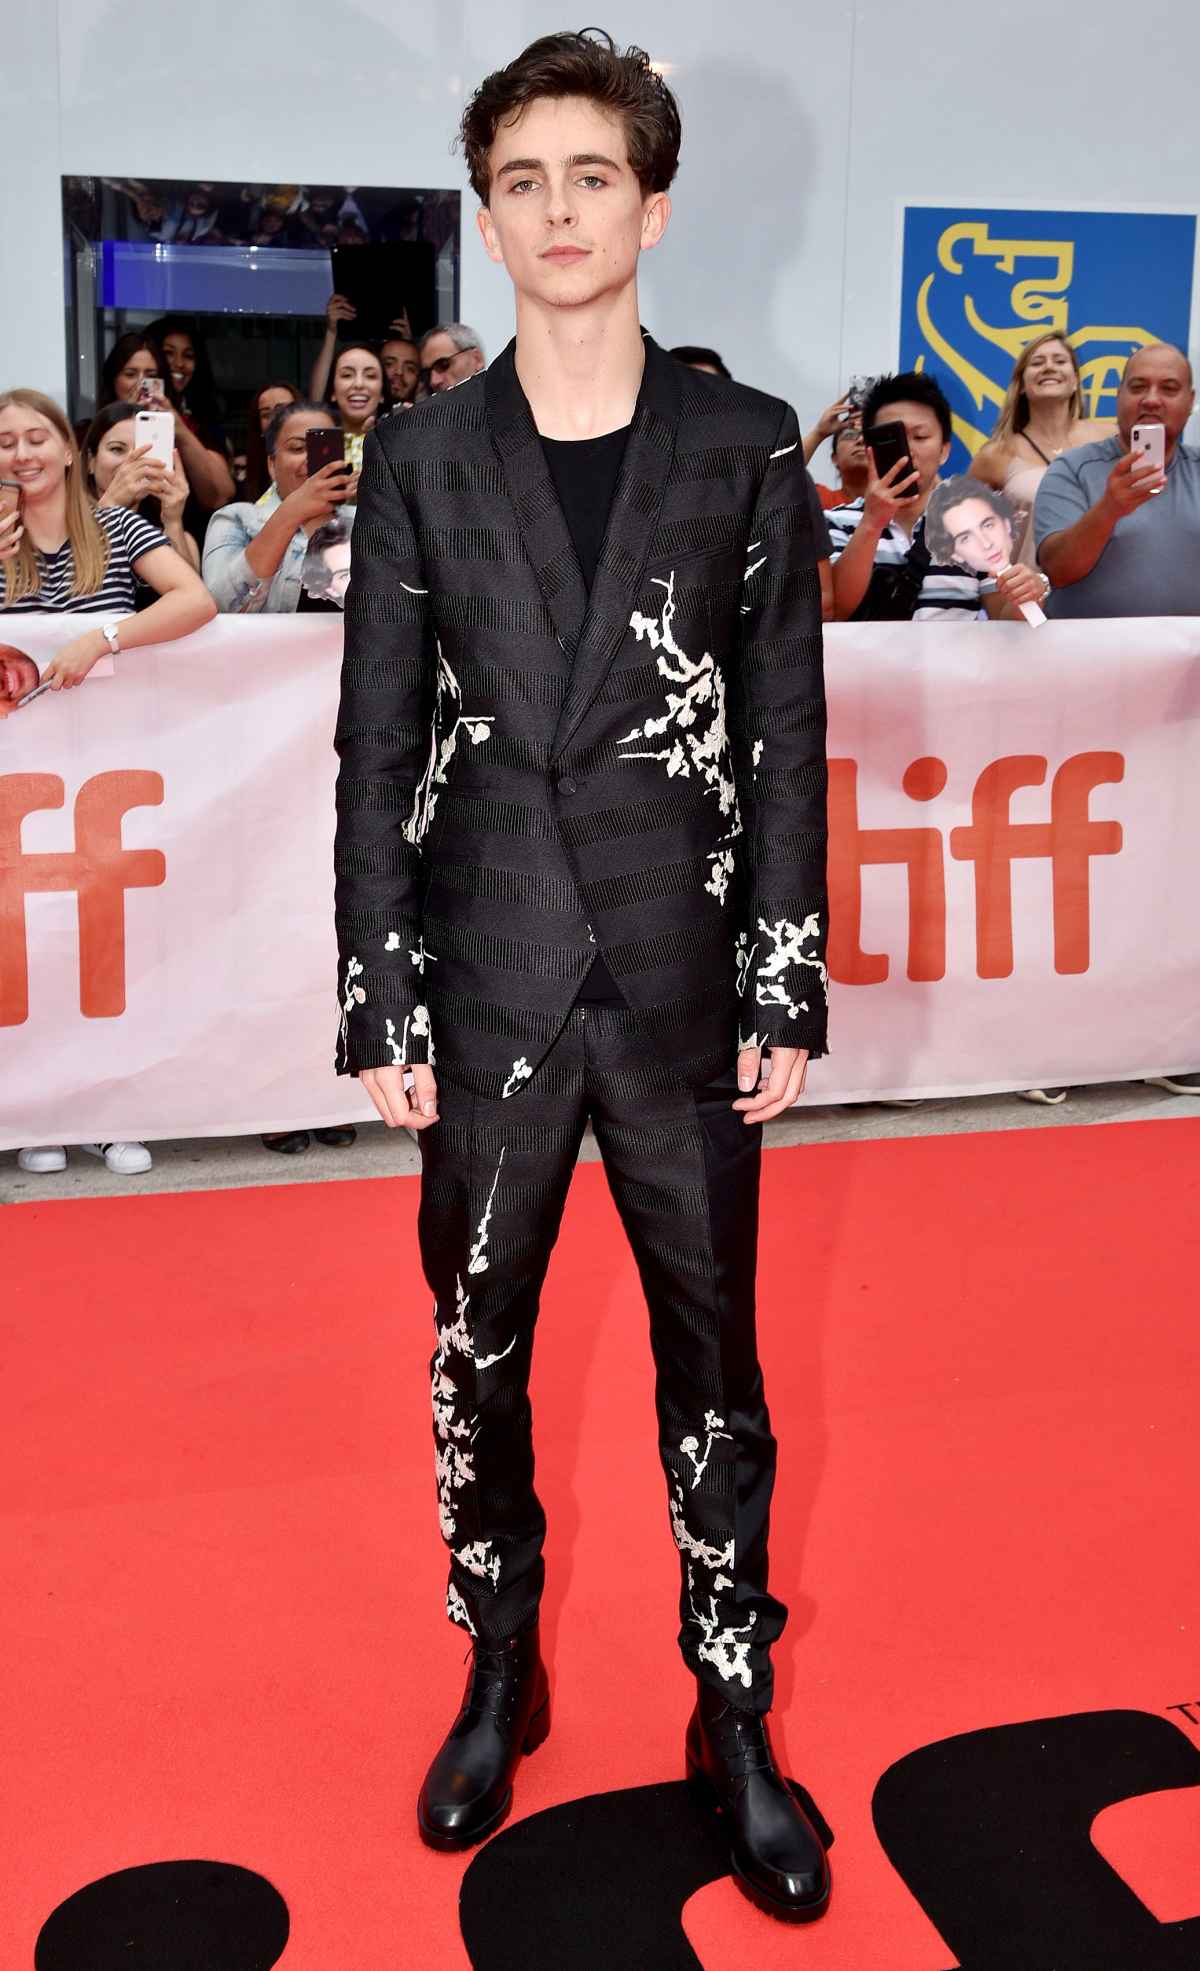 Timothee Chalamet: Hottest fashion statements from the red carpet